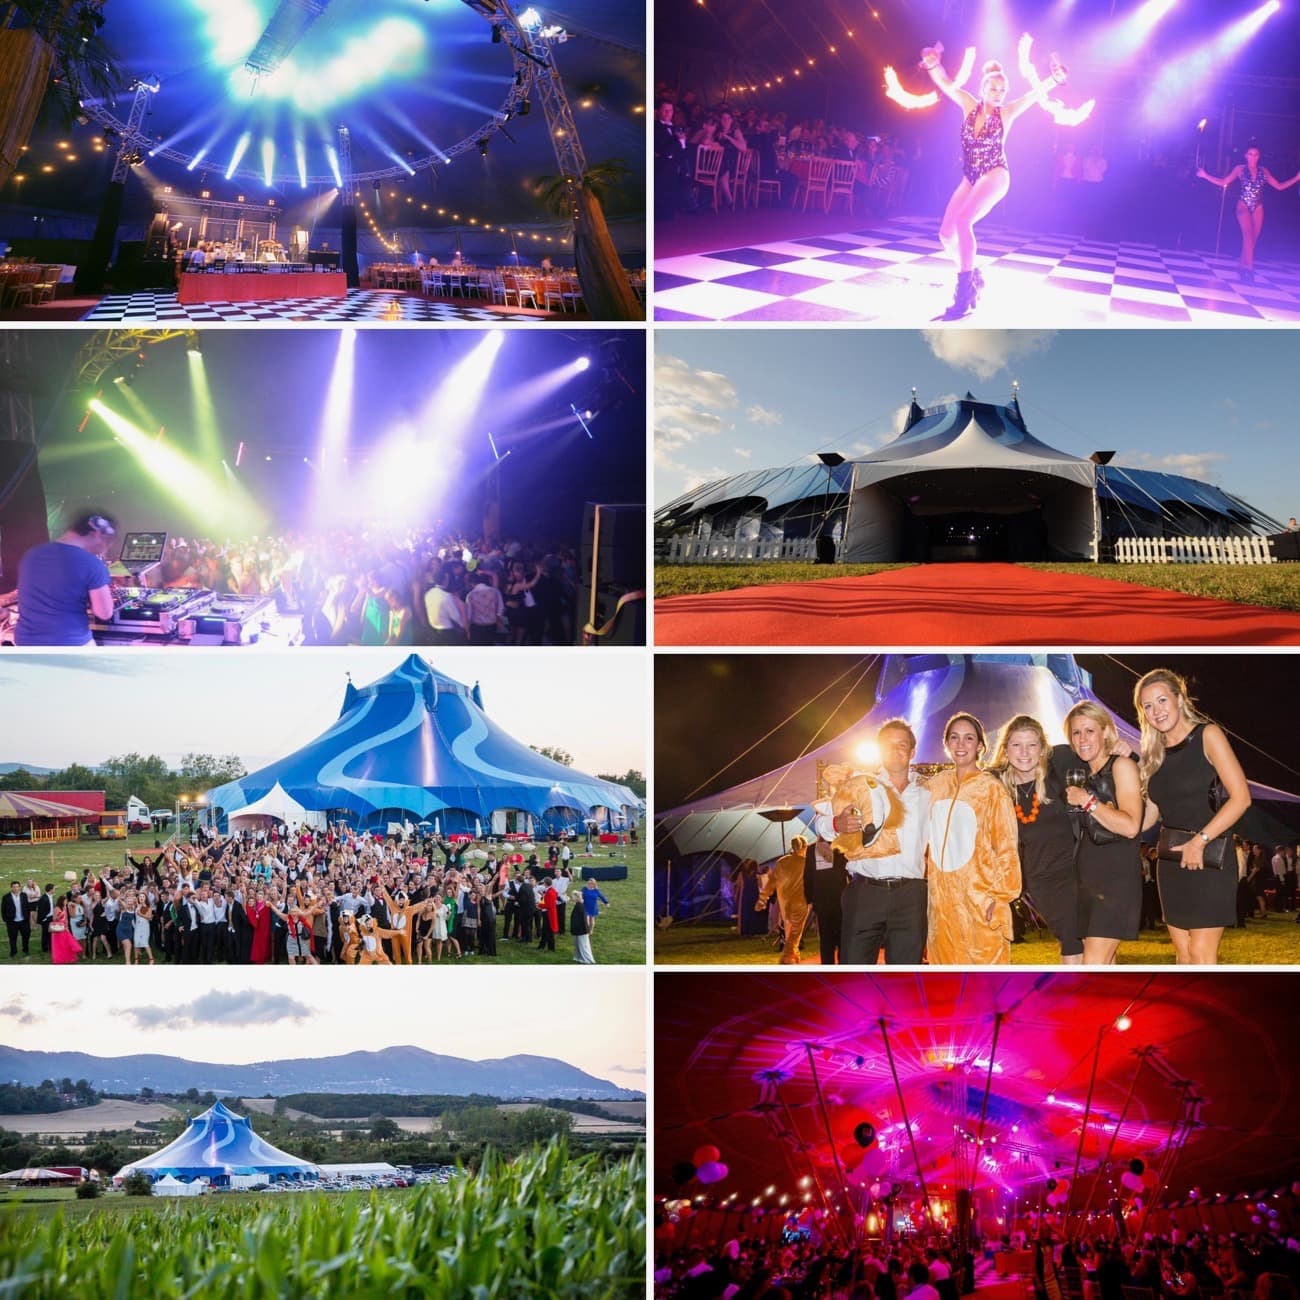 Big top corporate parties with fire performers and nightclub lighting